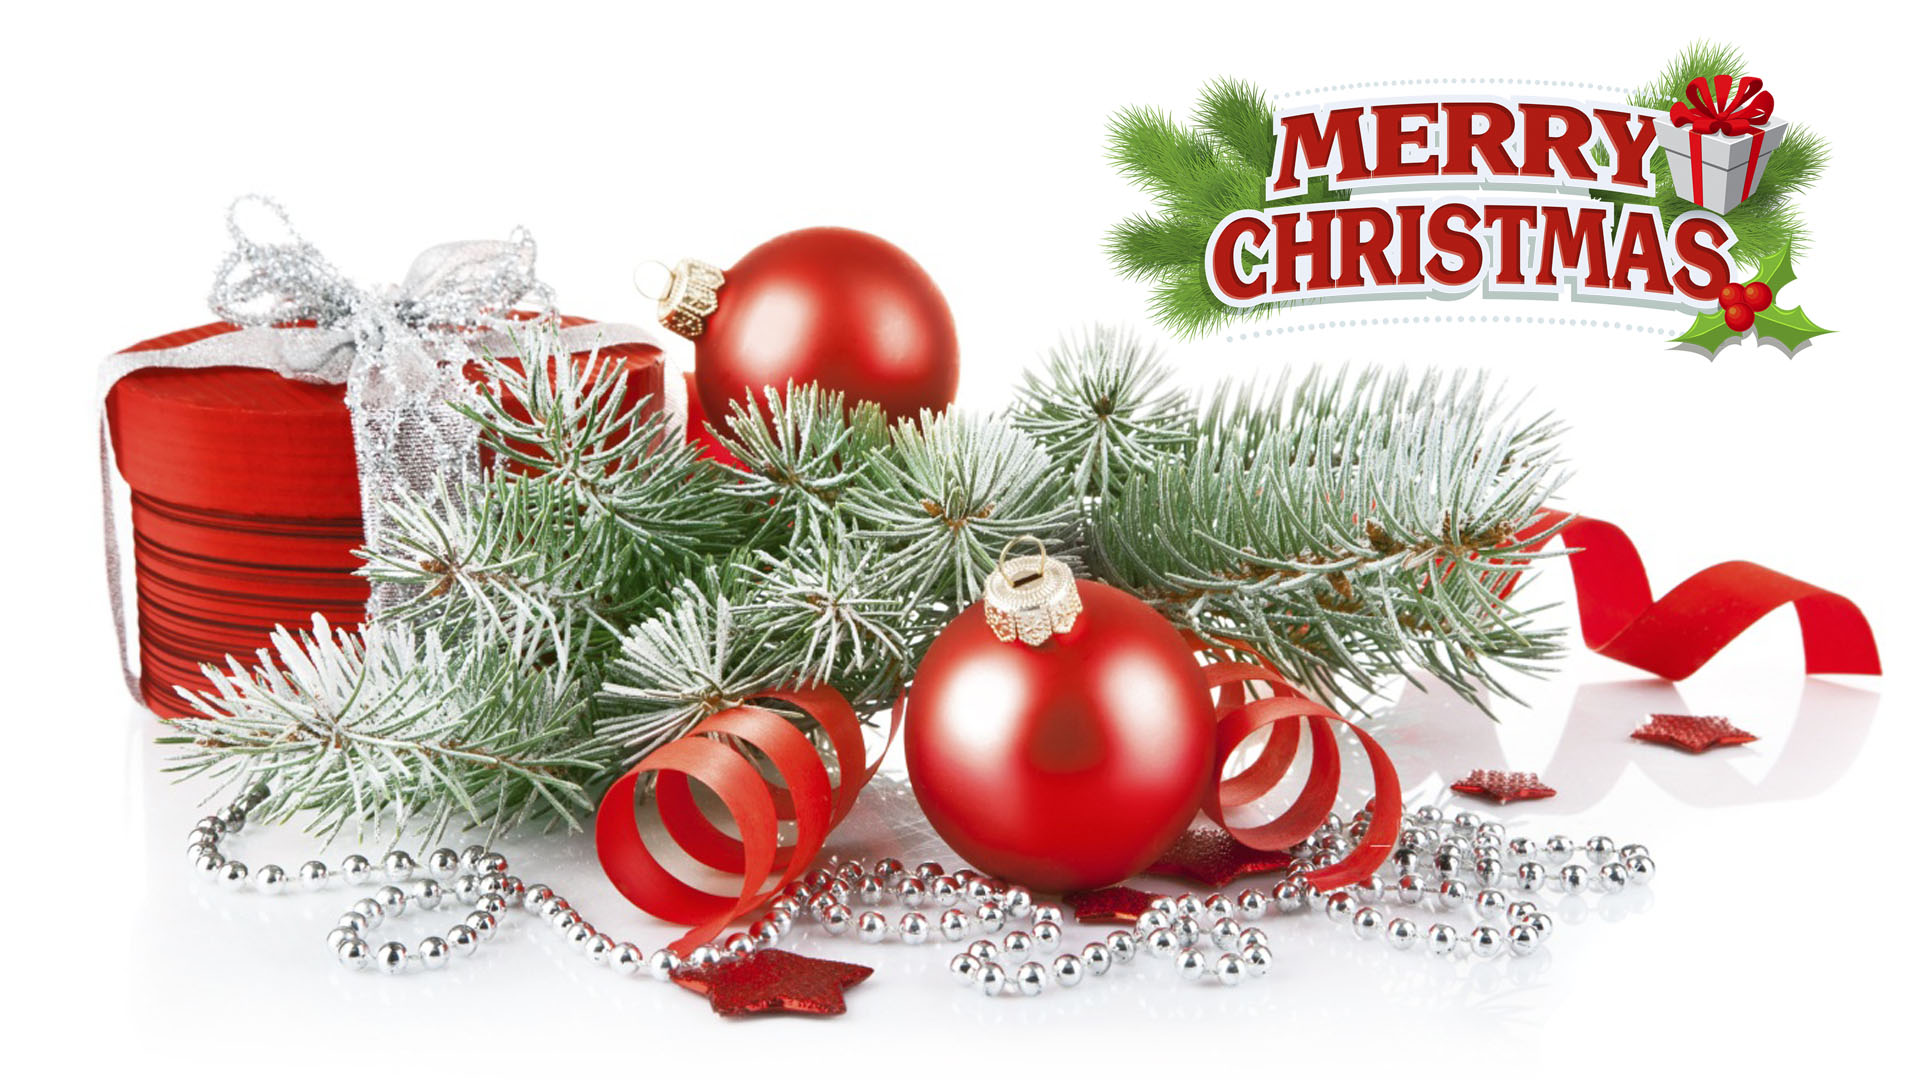 Merry Christmas Greeting Card Android Wallpaper For Your